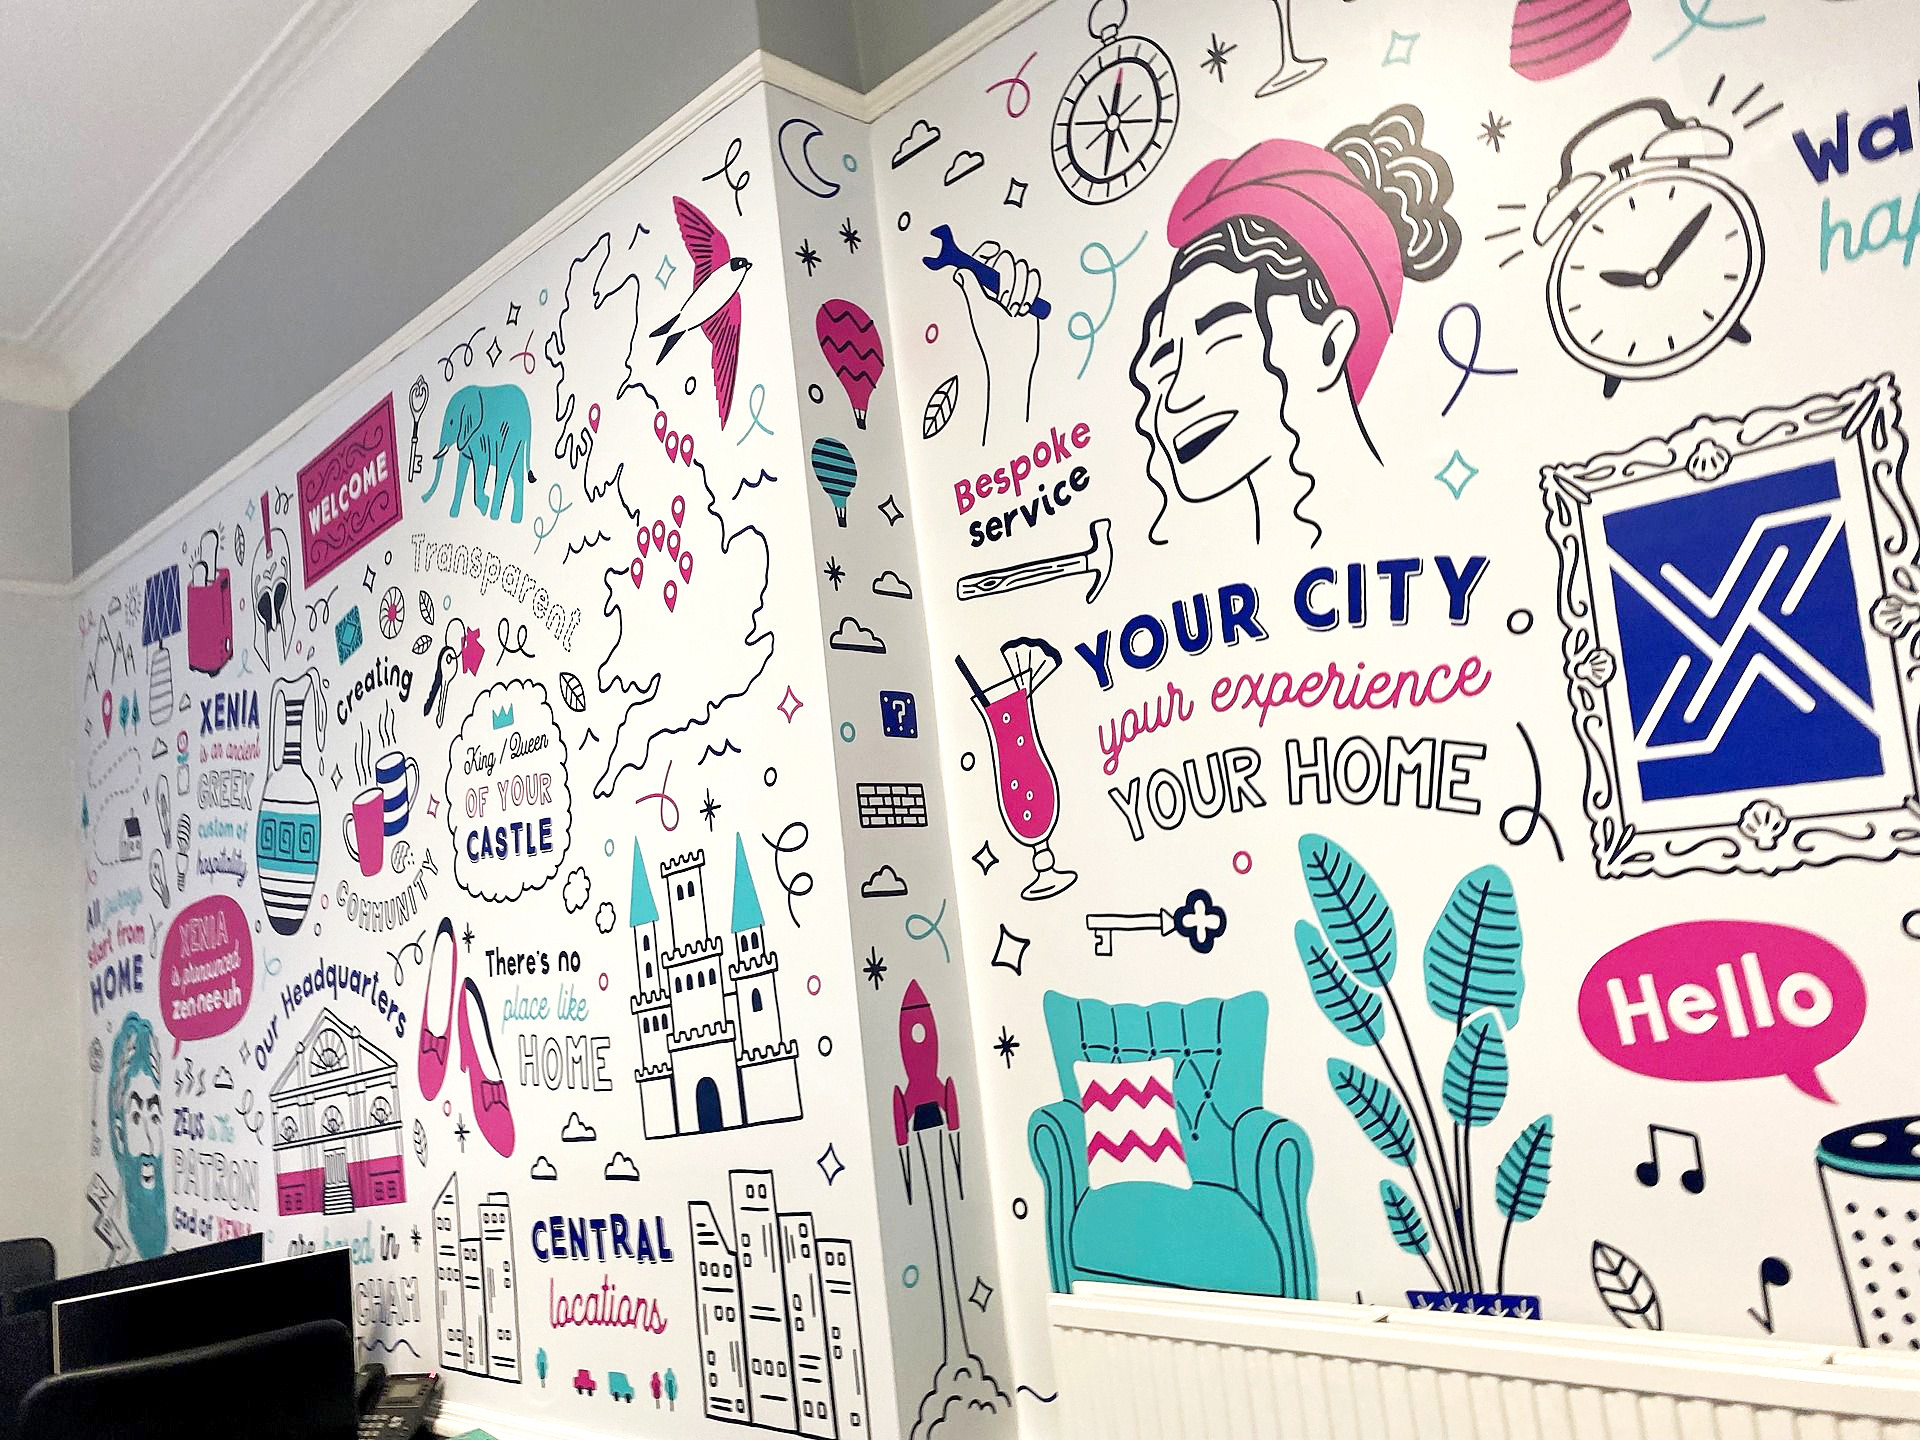 Xenia Wall Mural Illustrations by Root Studio